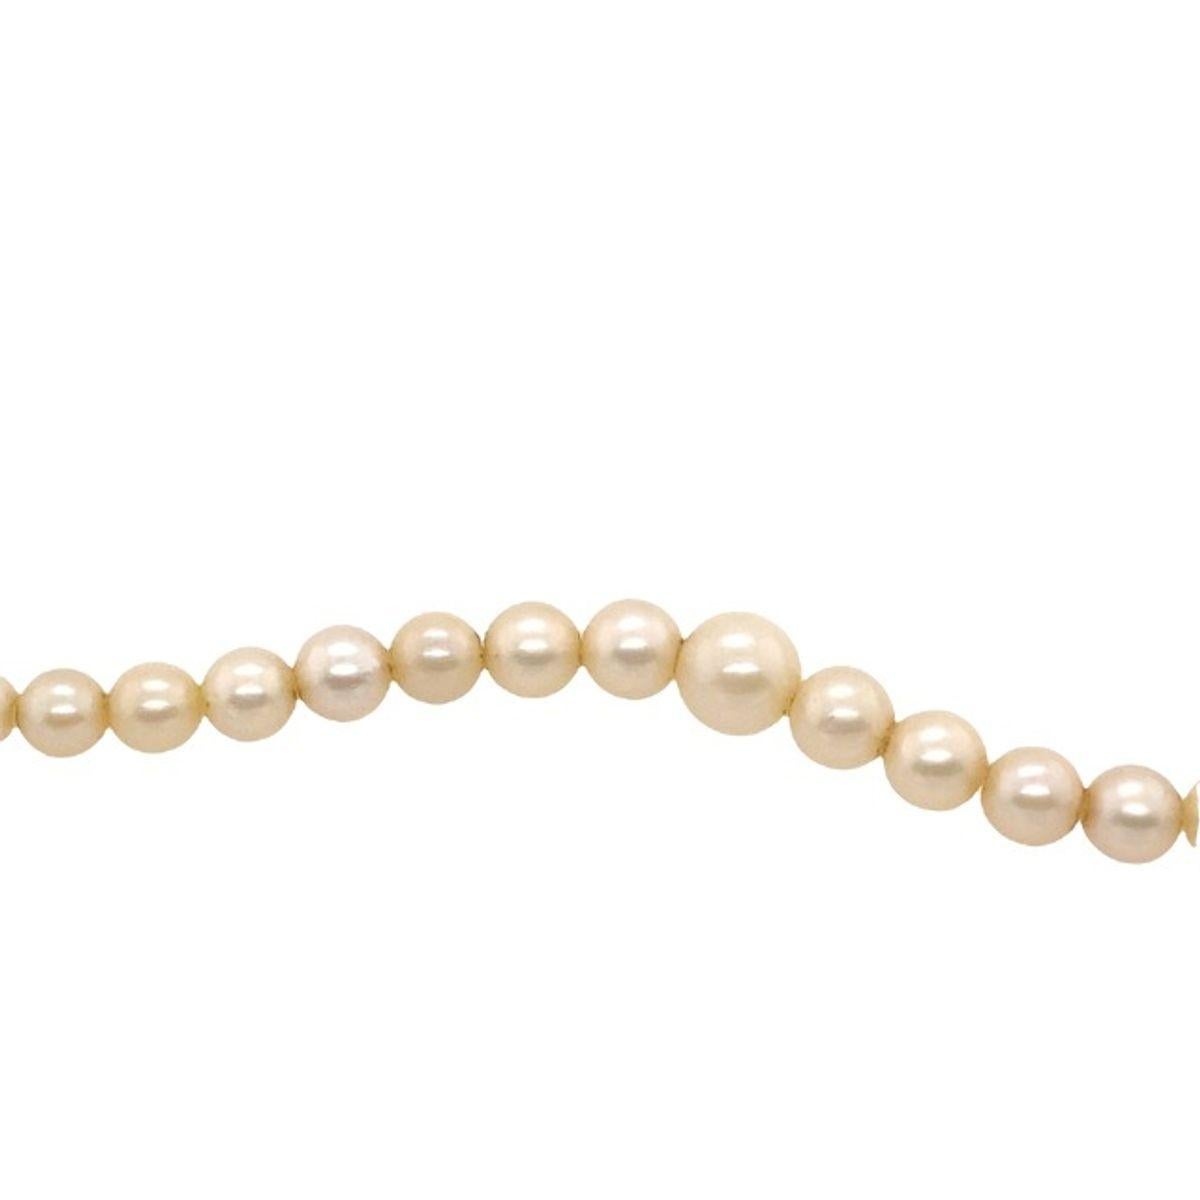 Graduated Cultured Pearl Necklace with Silver Clasp & Safety Chain In Excellent Condition For Sale In London, GB